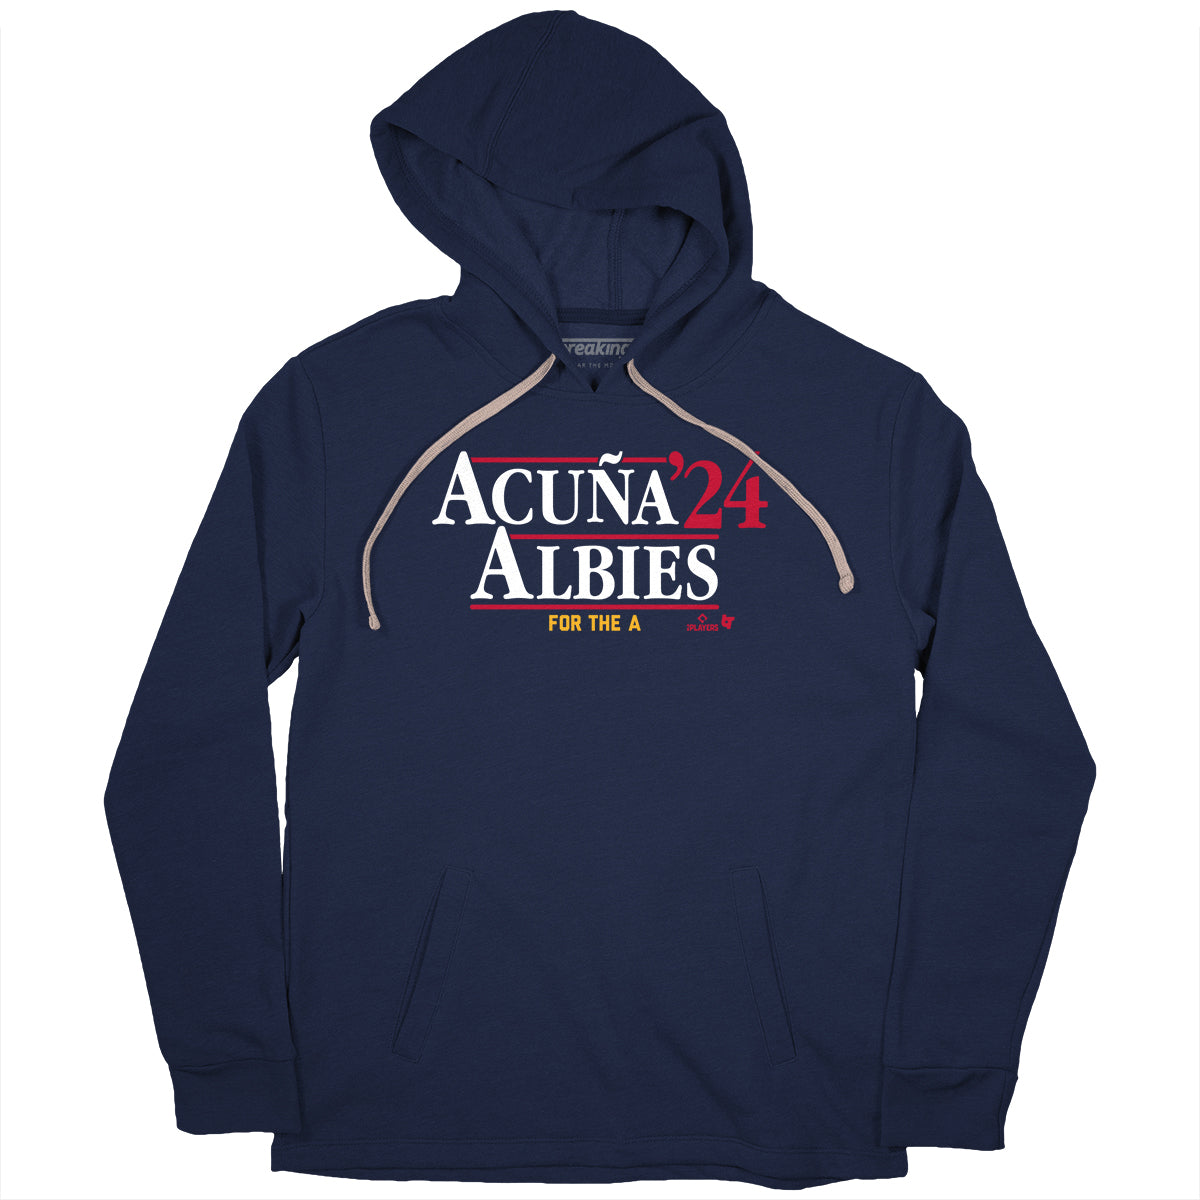 Ronald Acuña Jr. & Ozzie Albies ATL Icons Shirt, hoodie, sweater